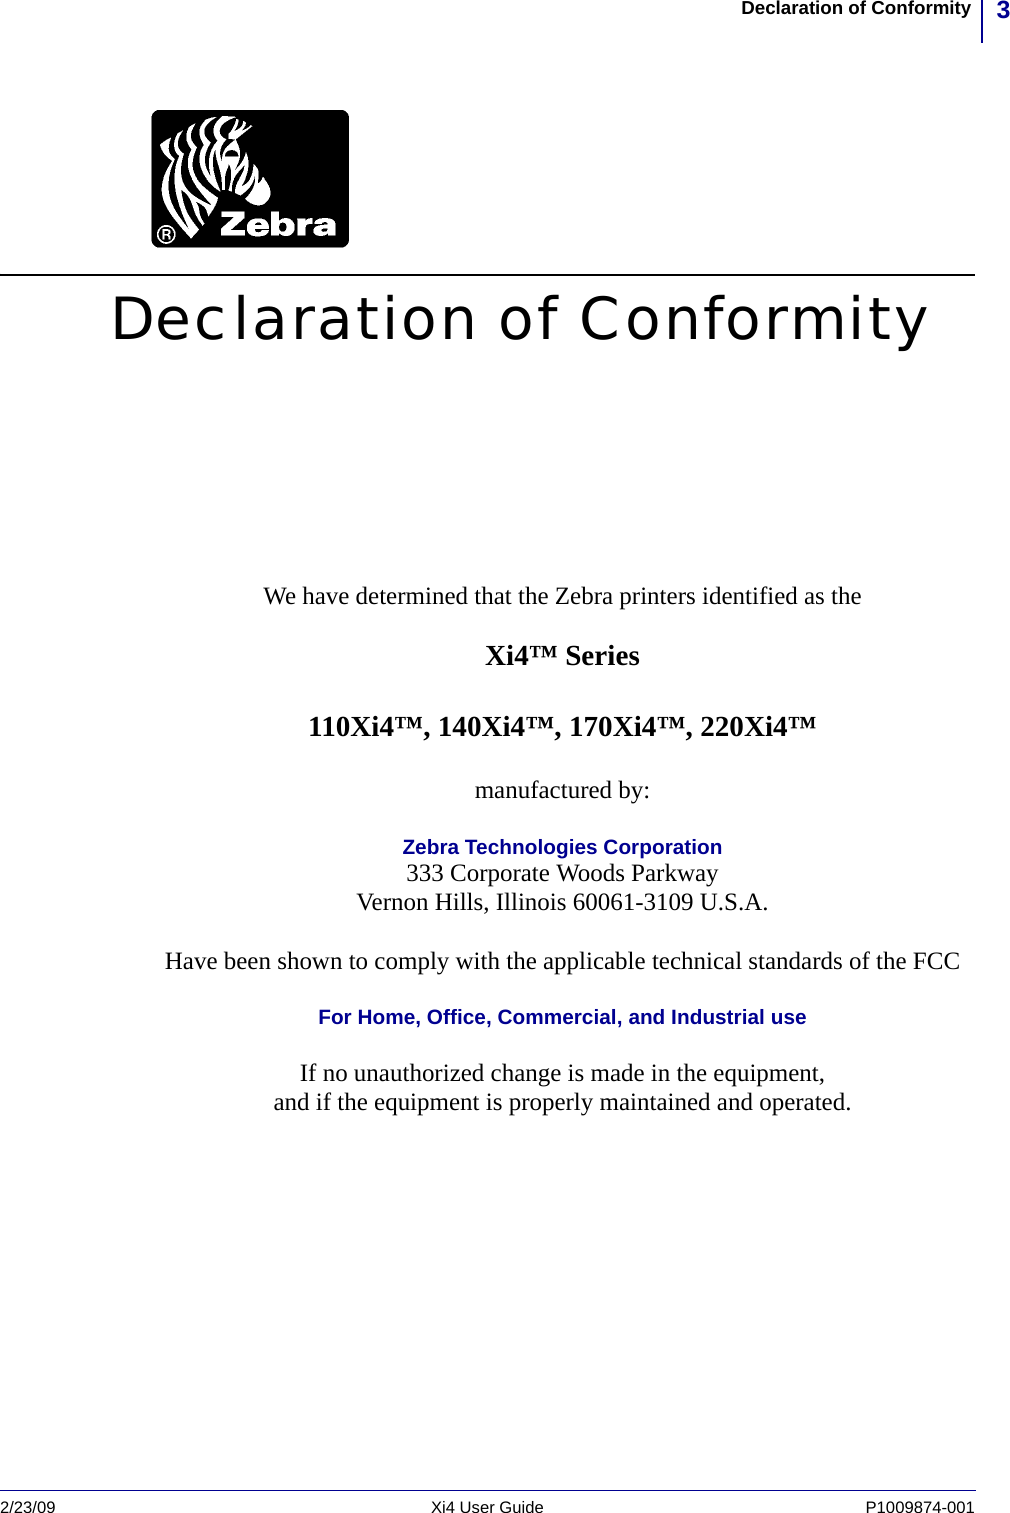 3Declaration of Conformity2/23/09 Xi4 User Guide P1009874-001  Declaration of ConformityWe have determined that the Zebra printers identified as theXi4™ Series110Xi4™, 140Xi4™, 170Xi4™, 220Xi4™manufactured by:Zebra Technologies Corporation333 Corporate Woods ParkwayVernon Hills, Illinois 60061-3109 U.S.A.Have been shown to comply with the applicable technical standards of the FCCFor Home, Office, Commercial, and Industrial useIf no unauthorized change is made in the equipment,and if the equipment is properly maintained and operated.